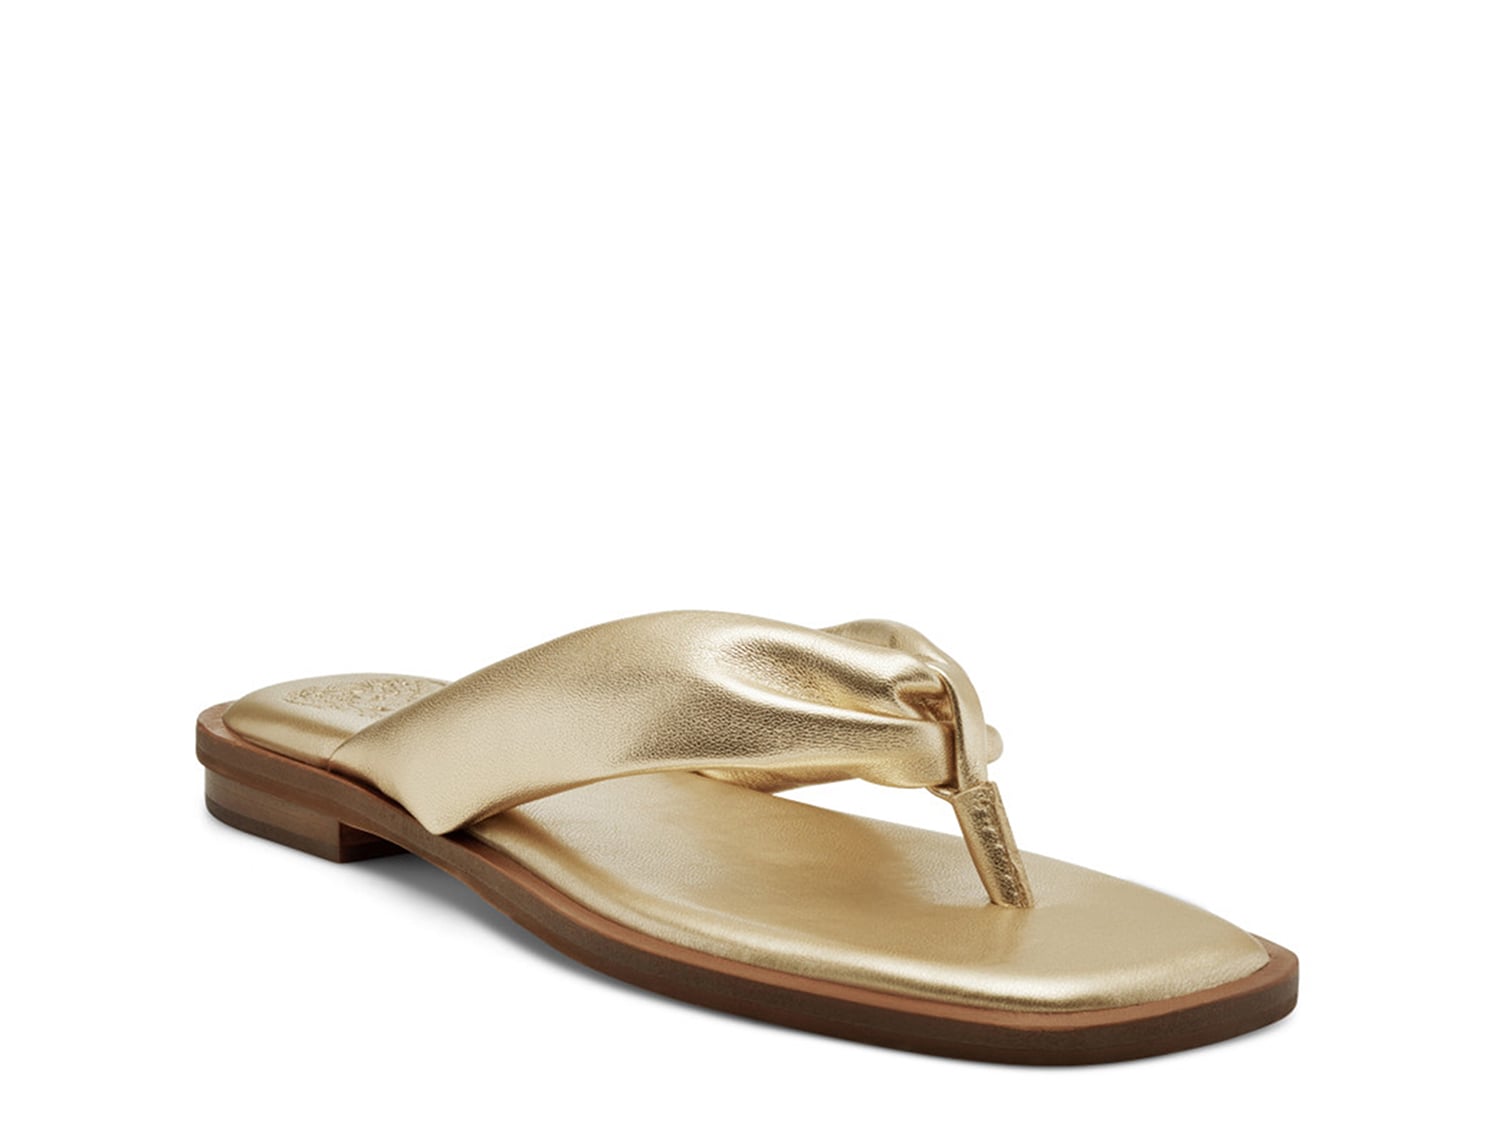 Vince Camuto Norshie Sandal - Free Shipping | DSW